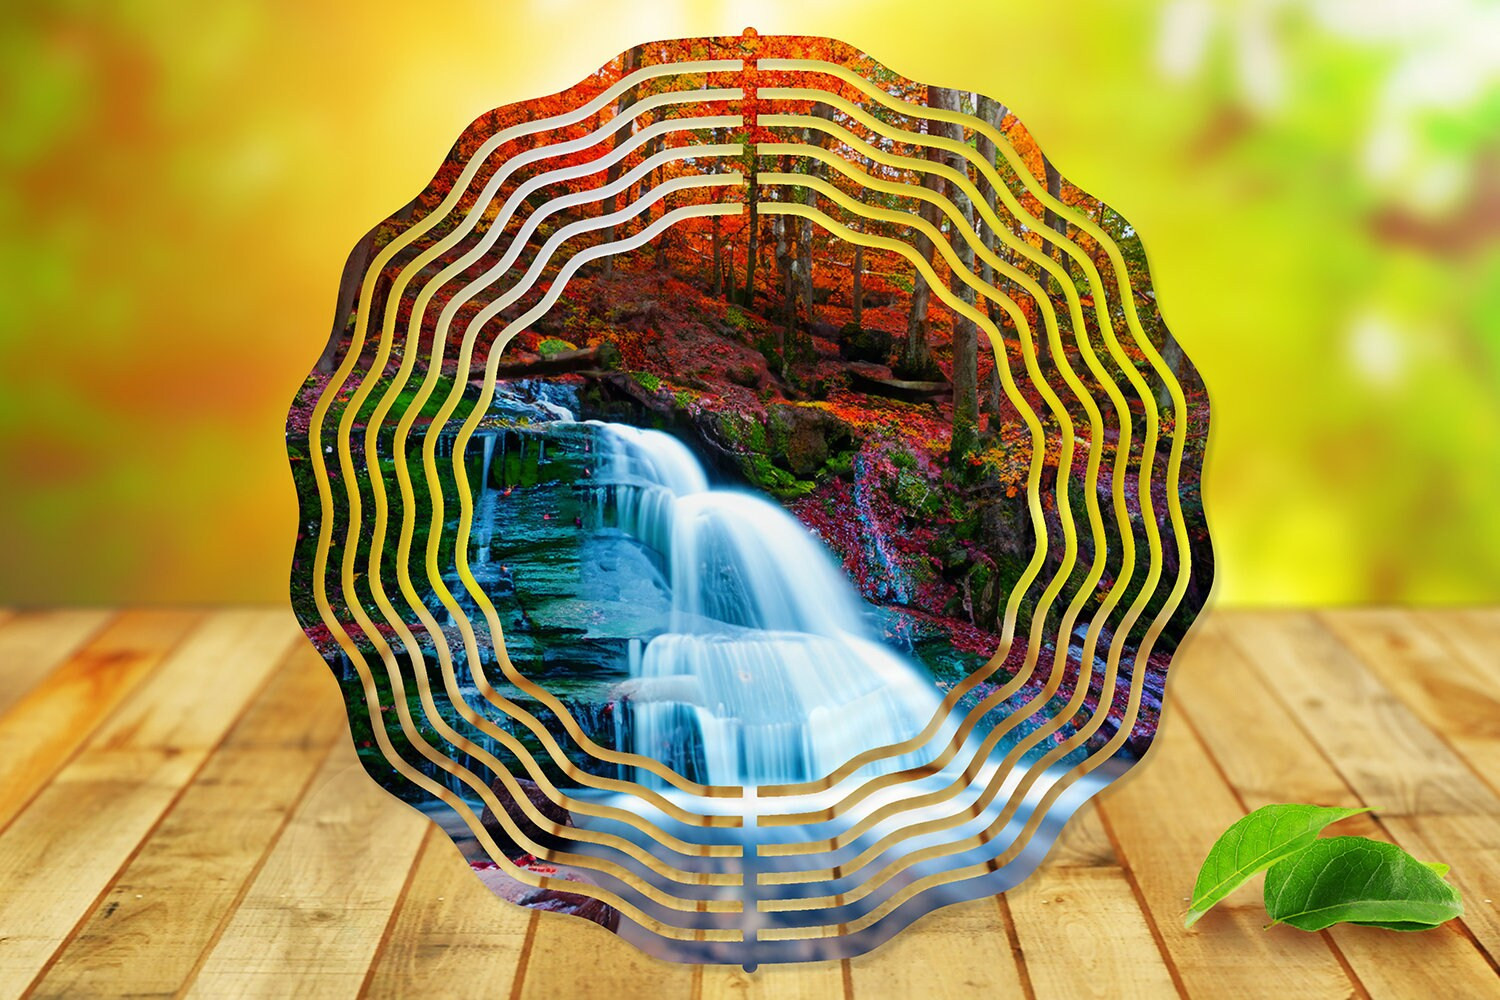 Fall Forest Waterfall Wind Spinner For Yard And Garden, Outdoor Garden Yard Decoration, Garden Decor, Chime Art Gift